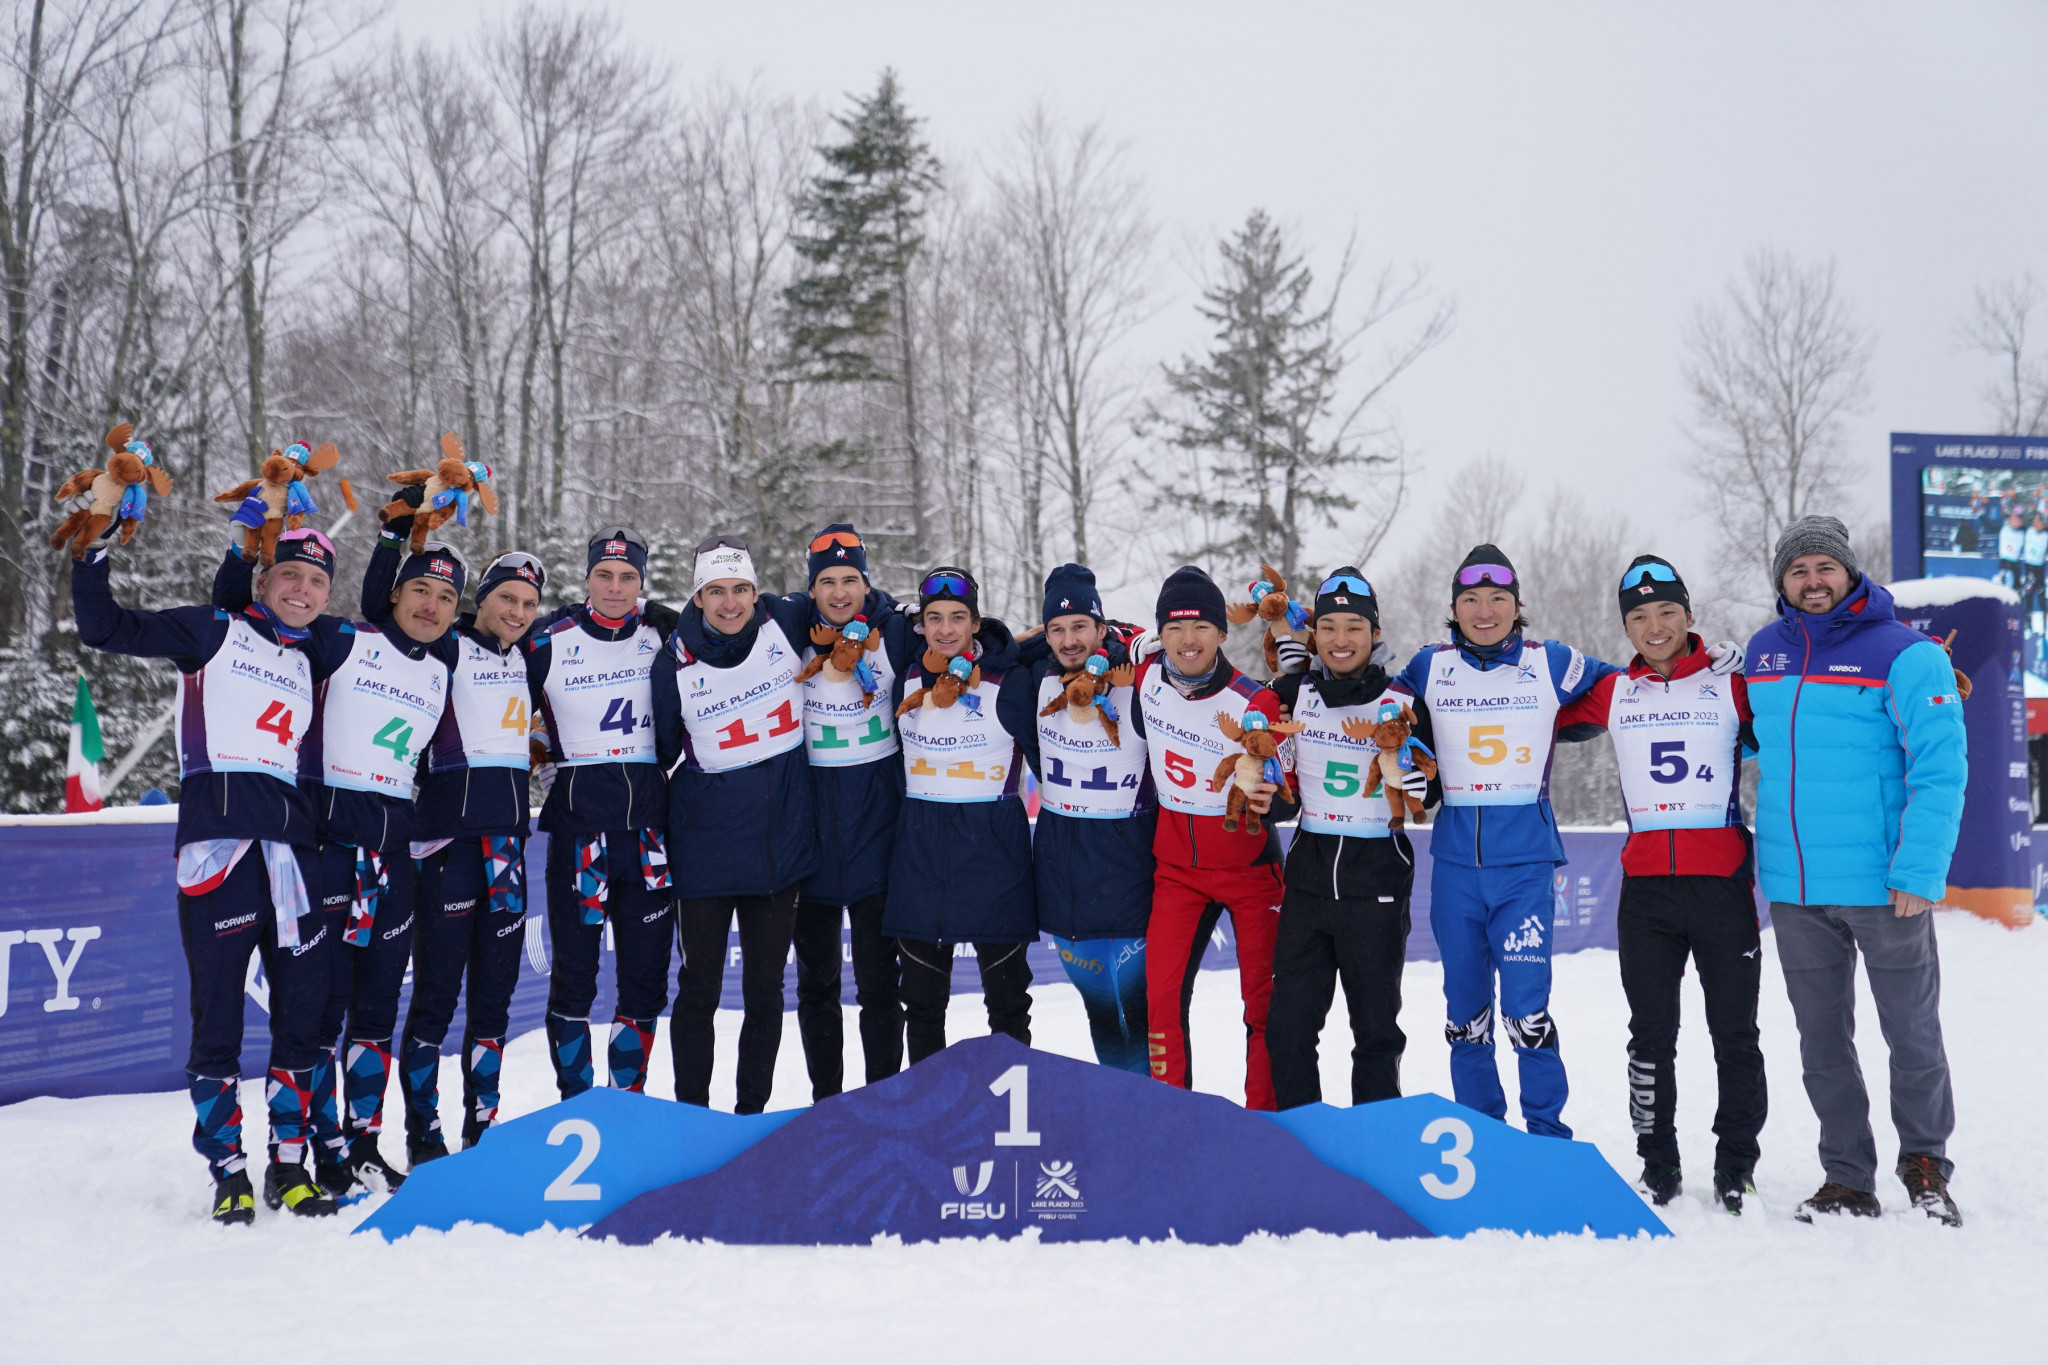 France triumphed with Norway and Japan taking silver and bronze respectively ©FISU